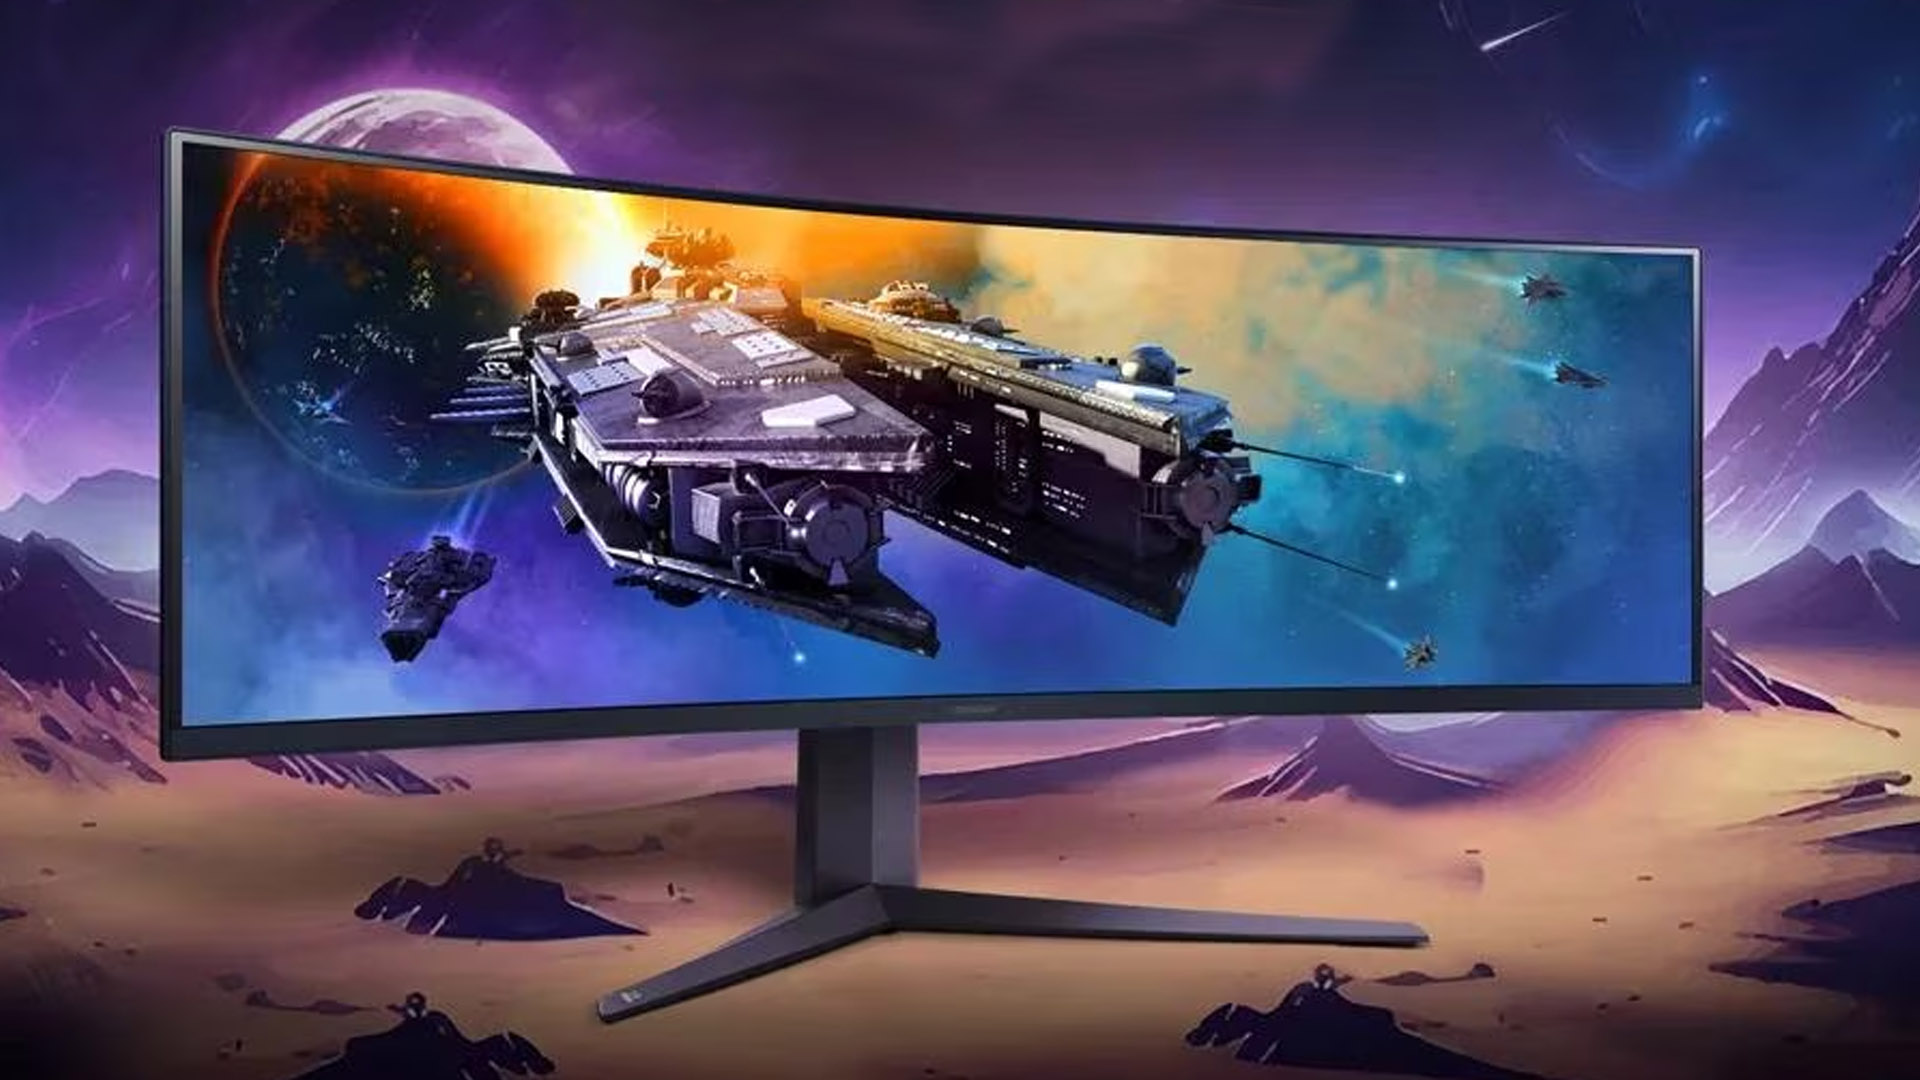 Get a massive 45-inch LG ultrawide monitor for just $550